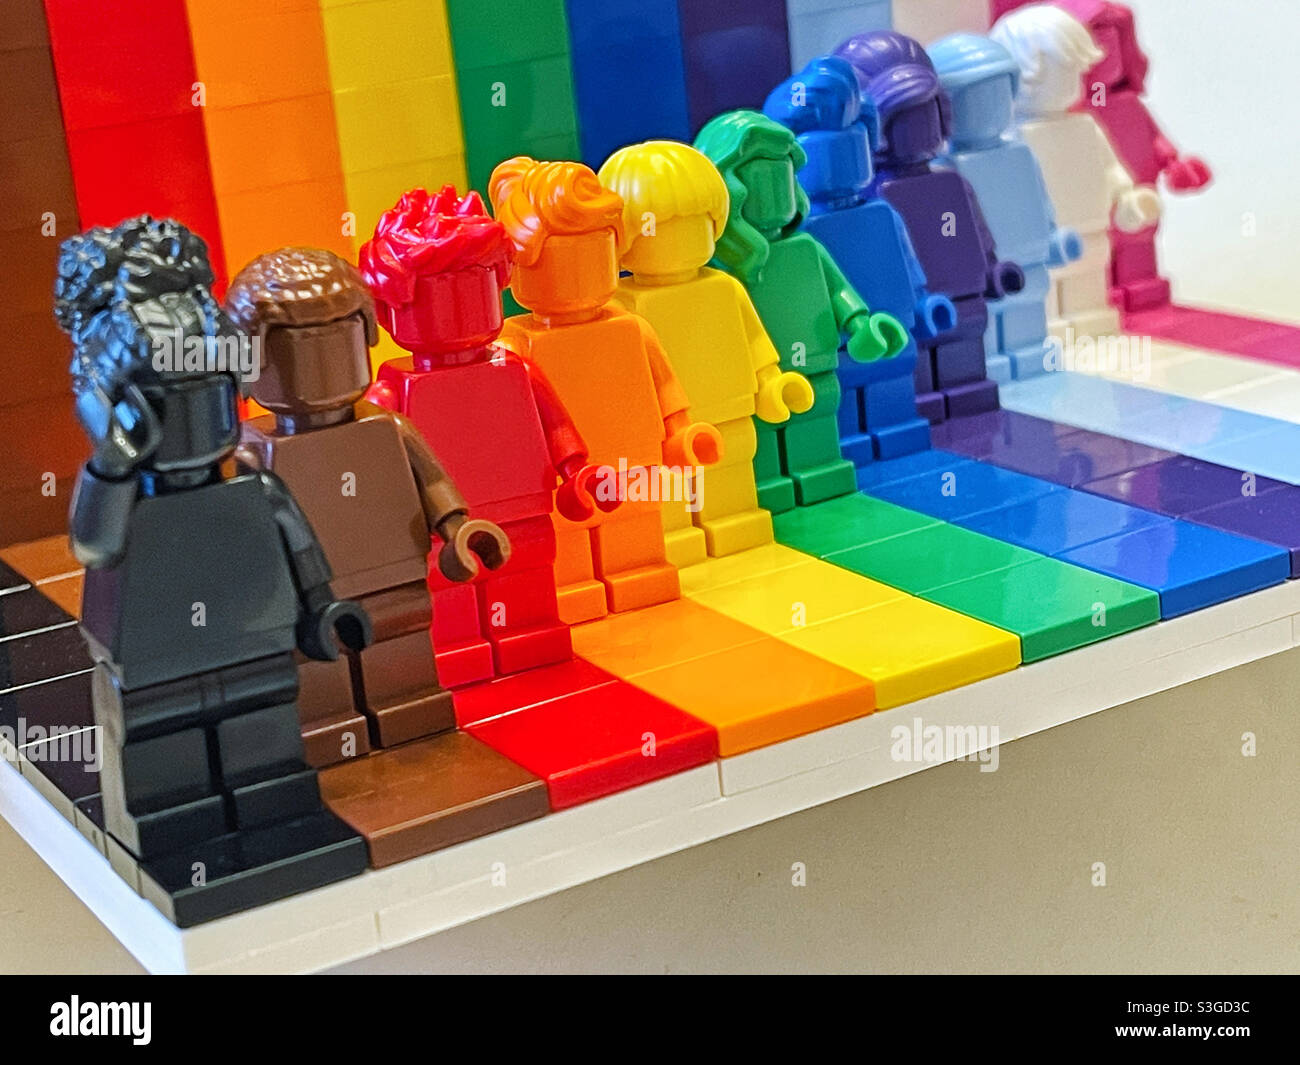 Lego is Awesome with rainbow colored figurines Stock Photo - Alamy